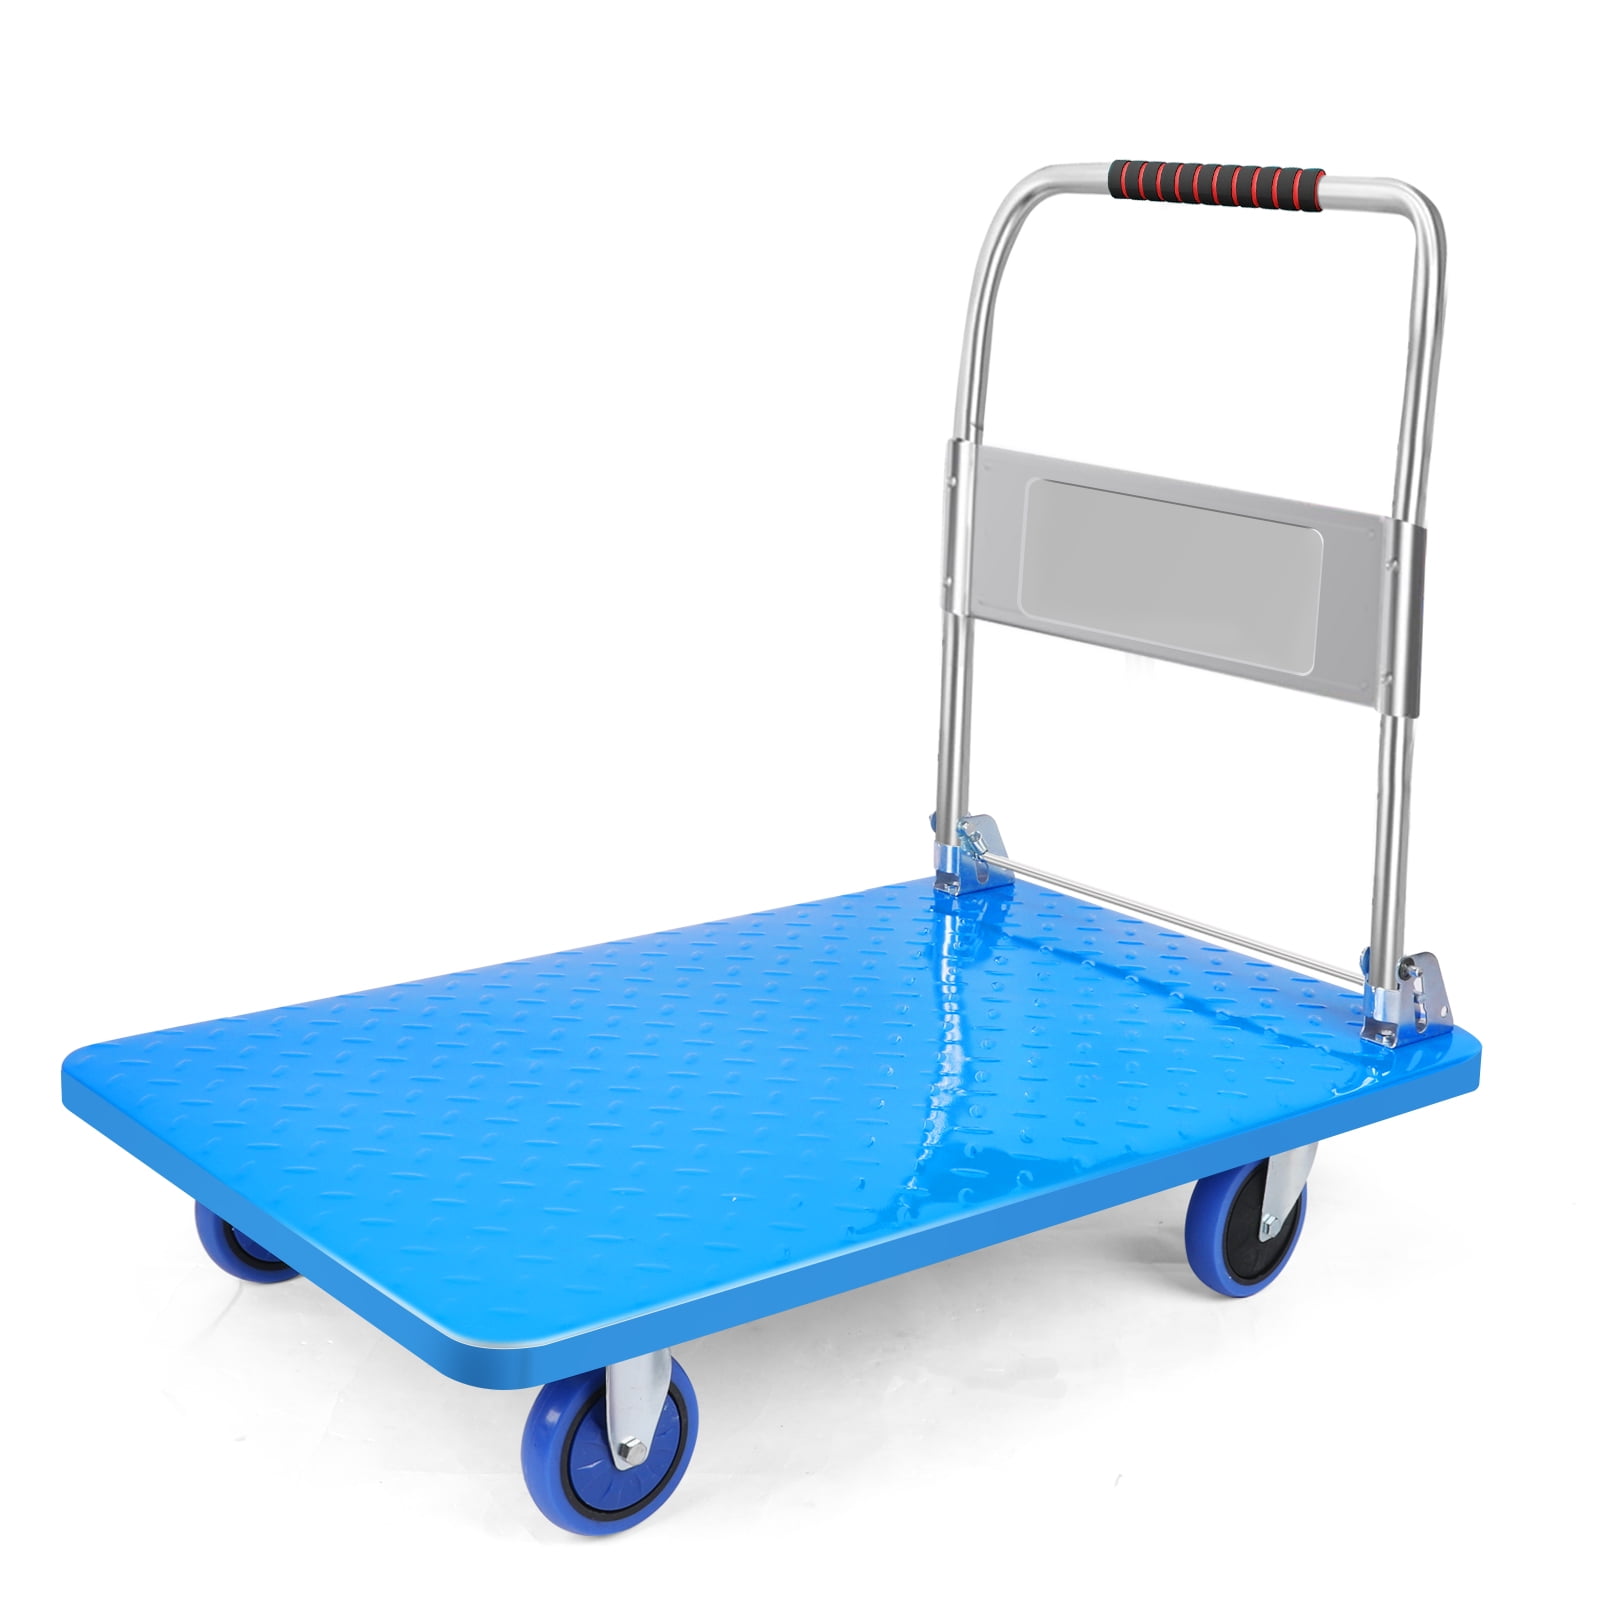 Platform Dolly Cart | Folding 1000 Pound Capacity 360 Degree Swivel Wheels | 35*18.5*32.5 in | Silver, Size: Silver-1000 lbs